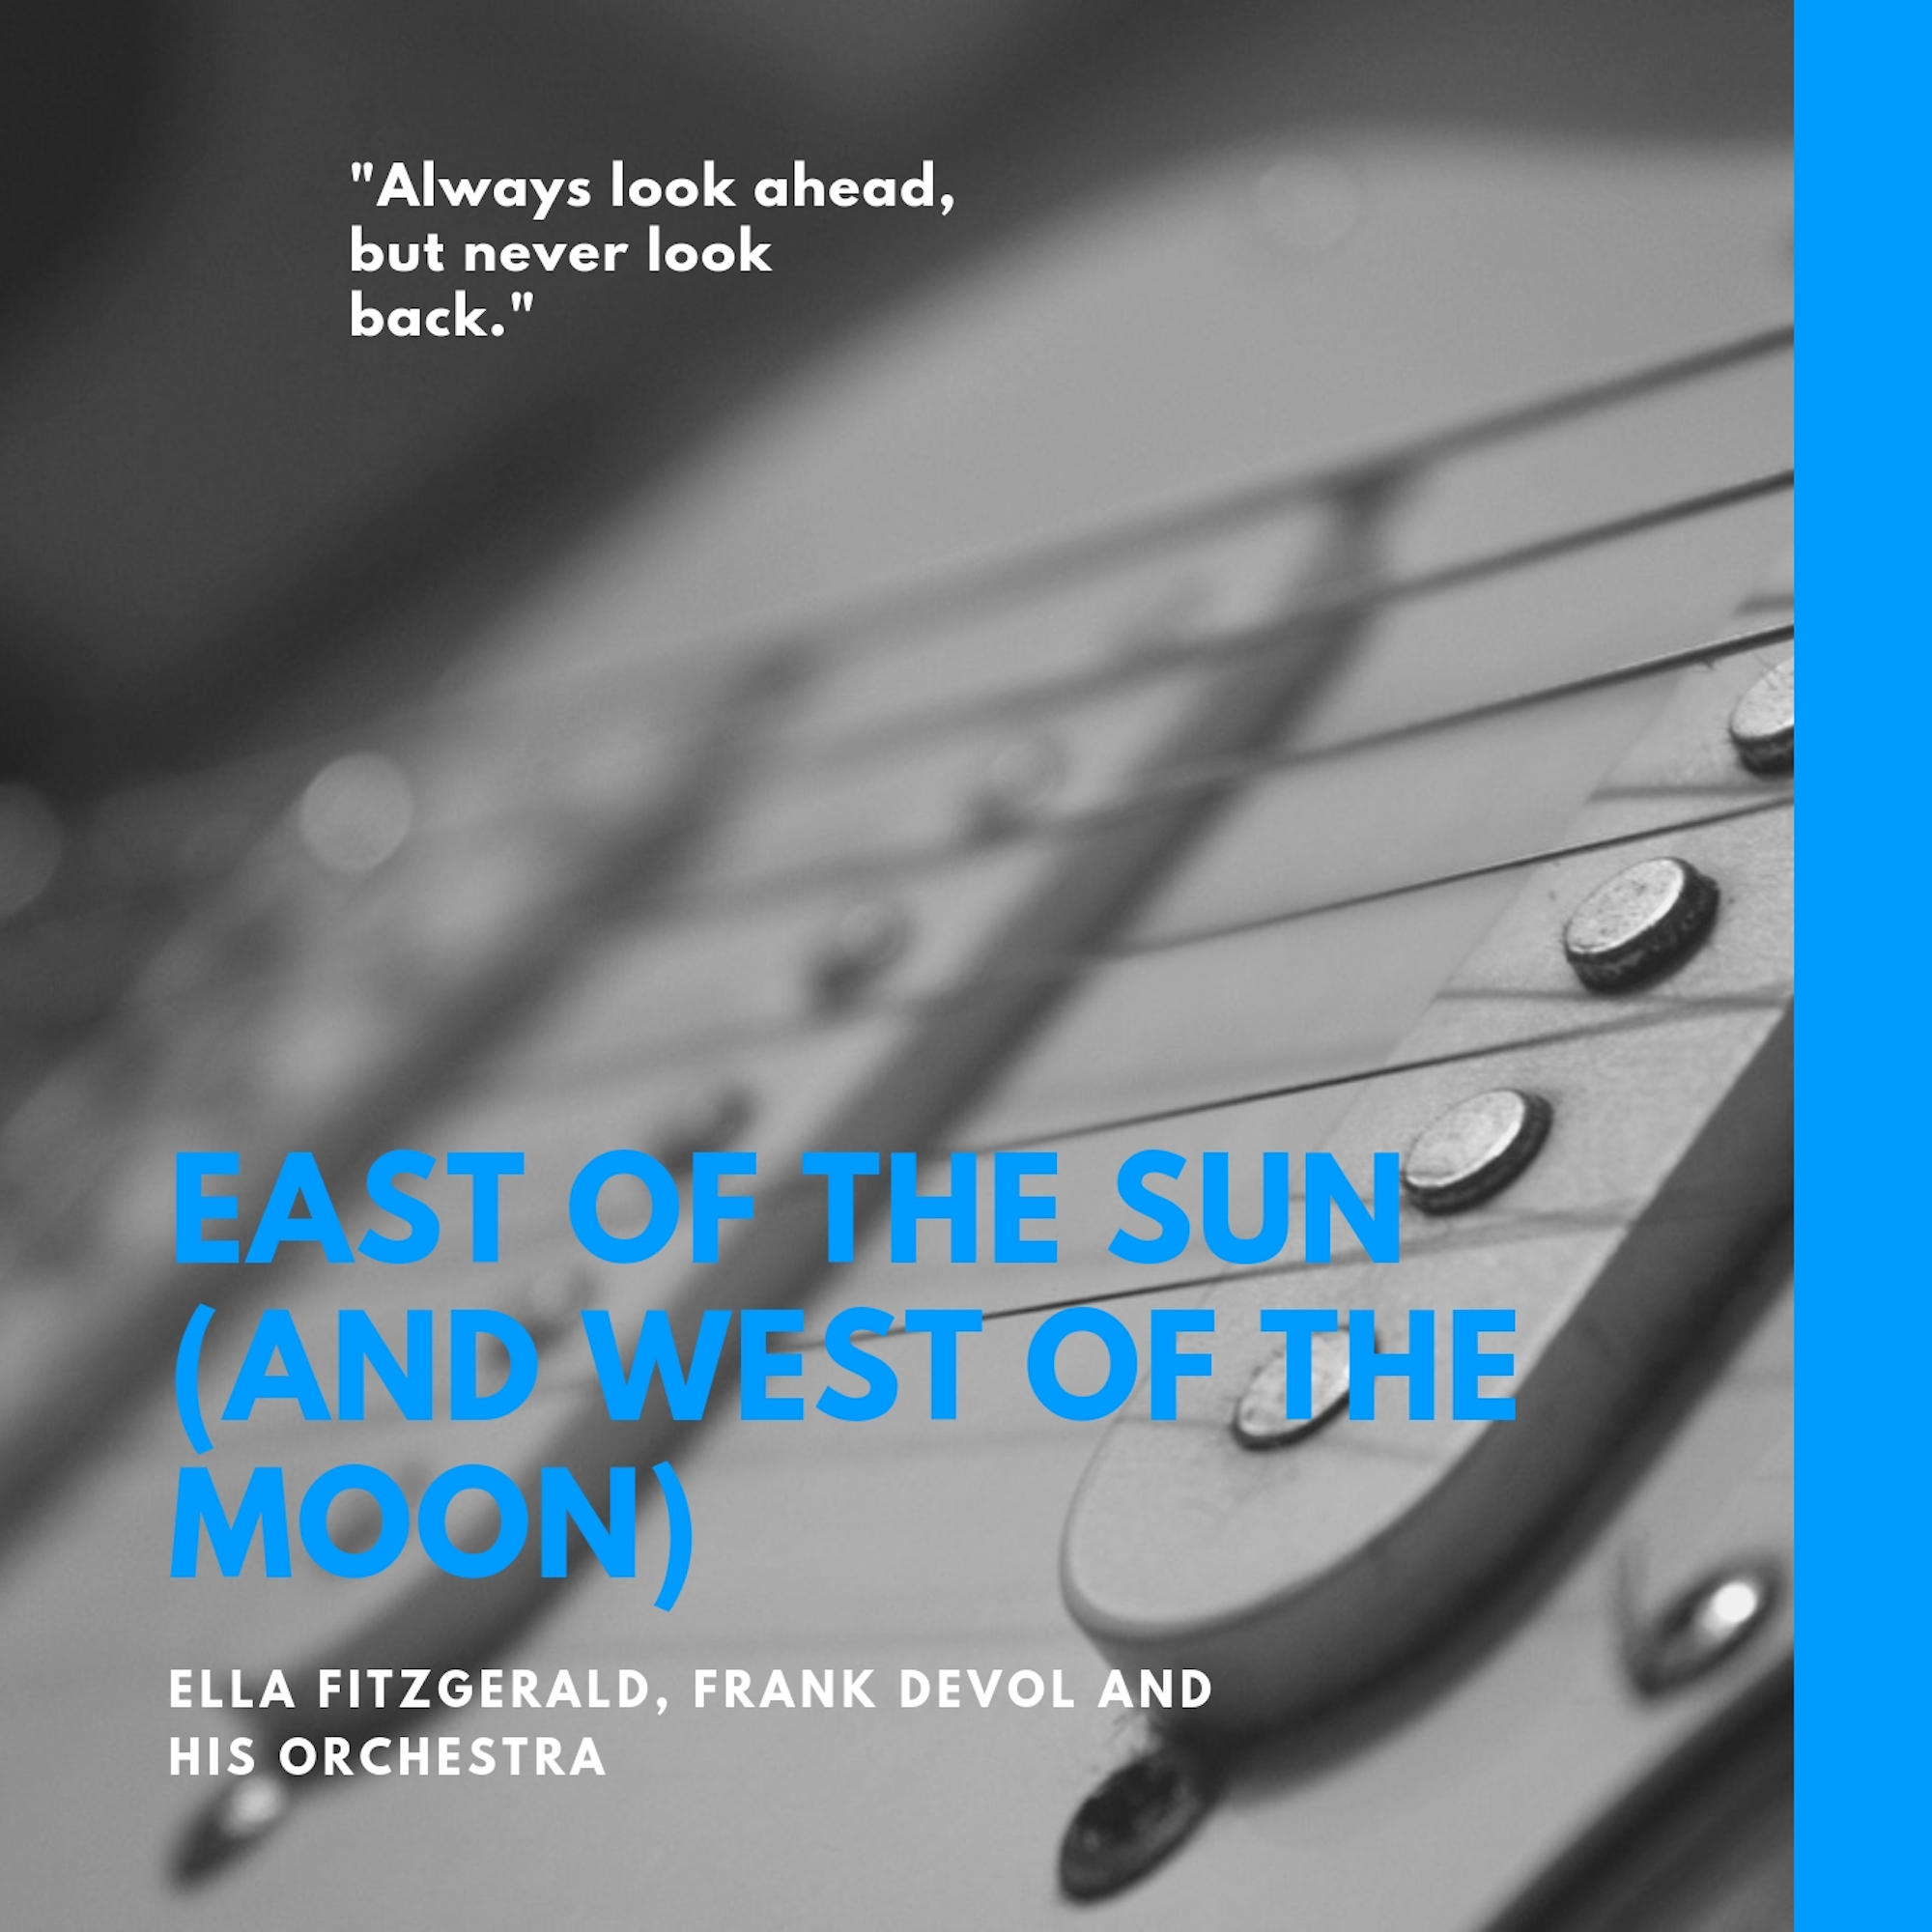 East of the Sun (And West of the Moon)